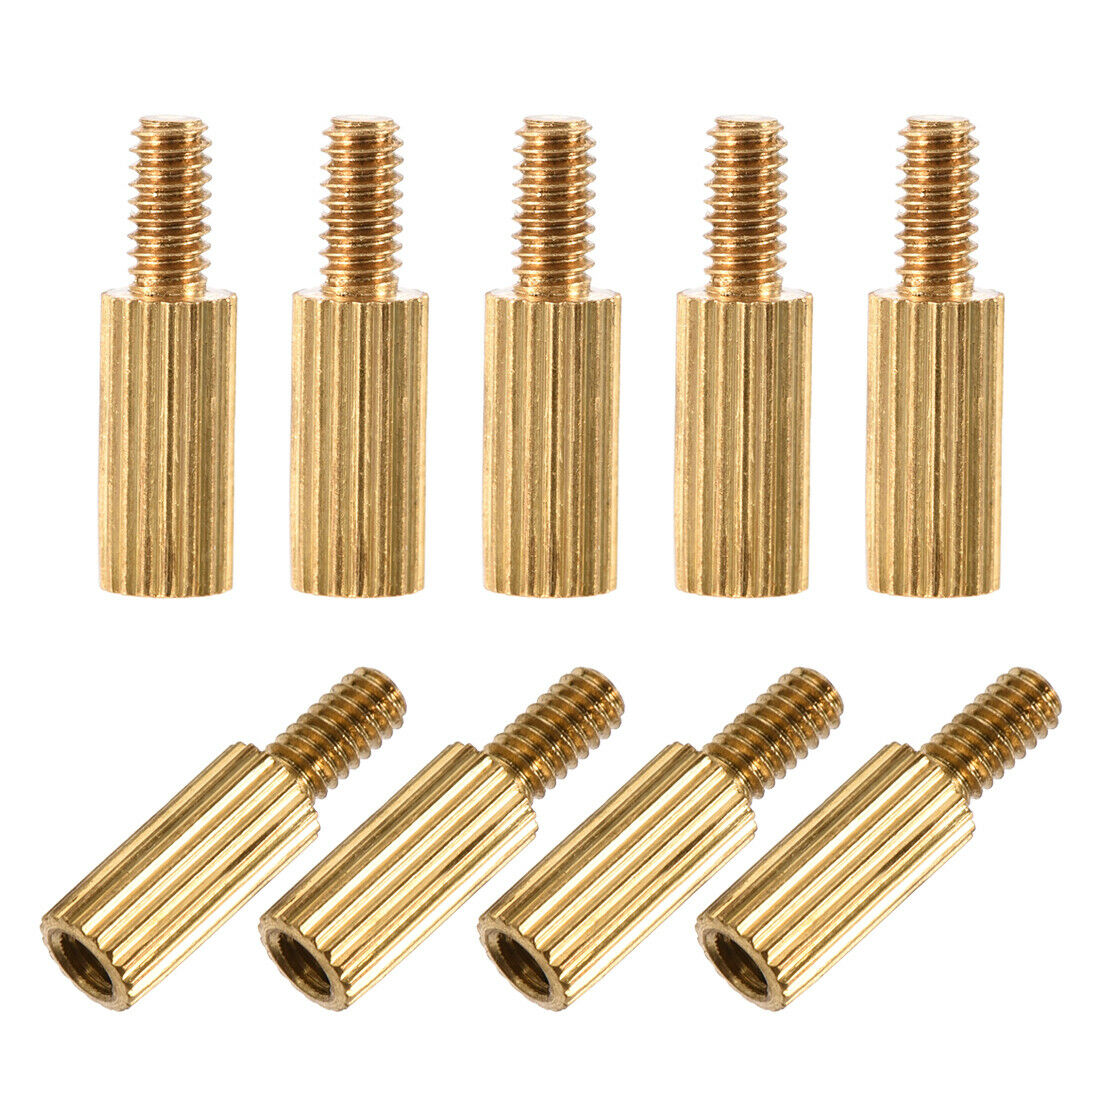 M2 X 6 Mm + 4 Mm Male To Female Cylinder Knurled Brass Spacer Standoff 110pcs